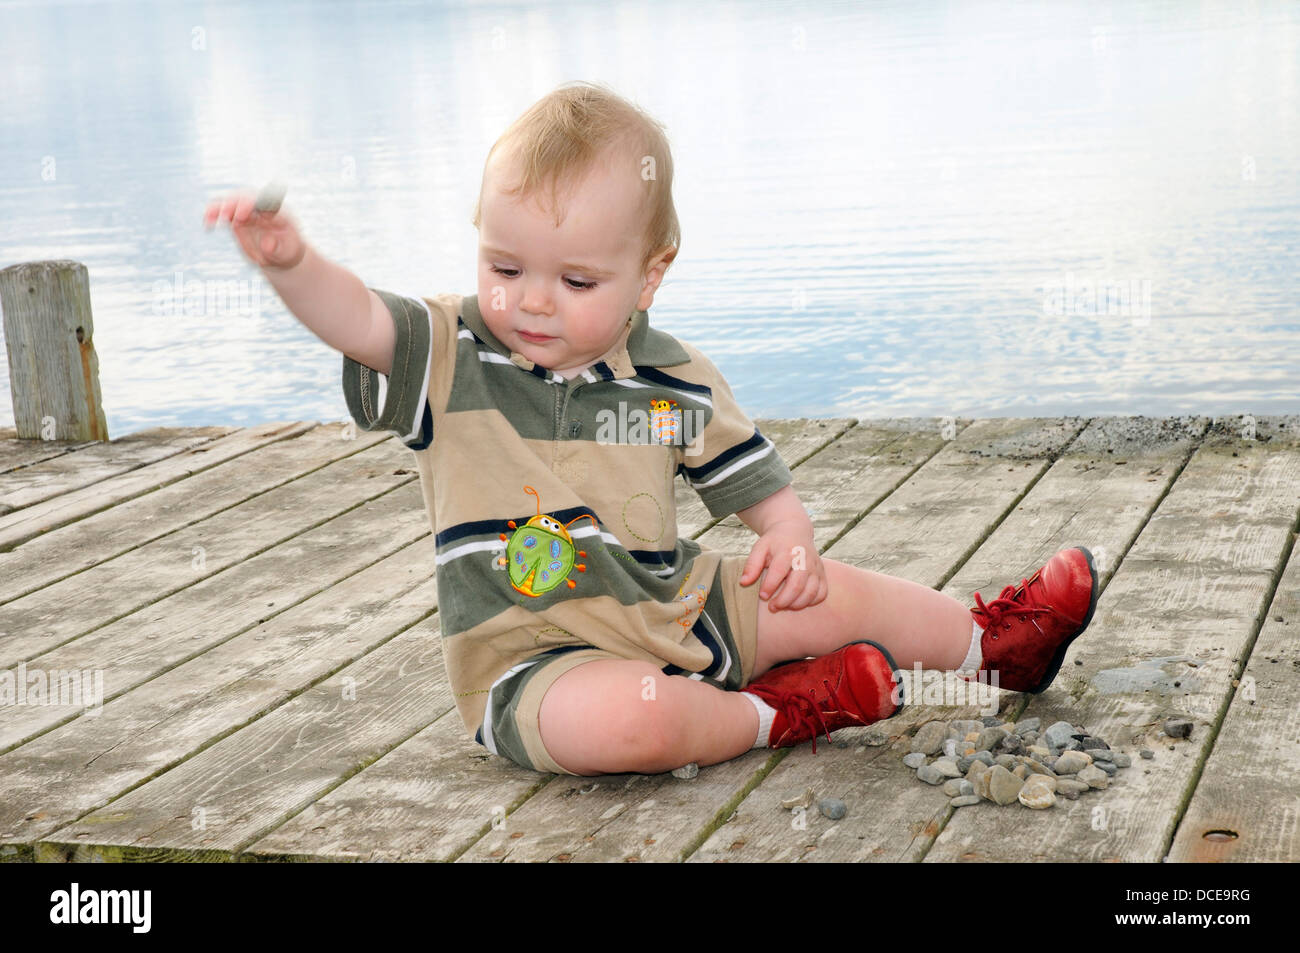 A small boy (aged 15 months) playing with a pile of stones Stock Photo